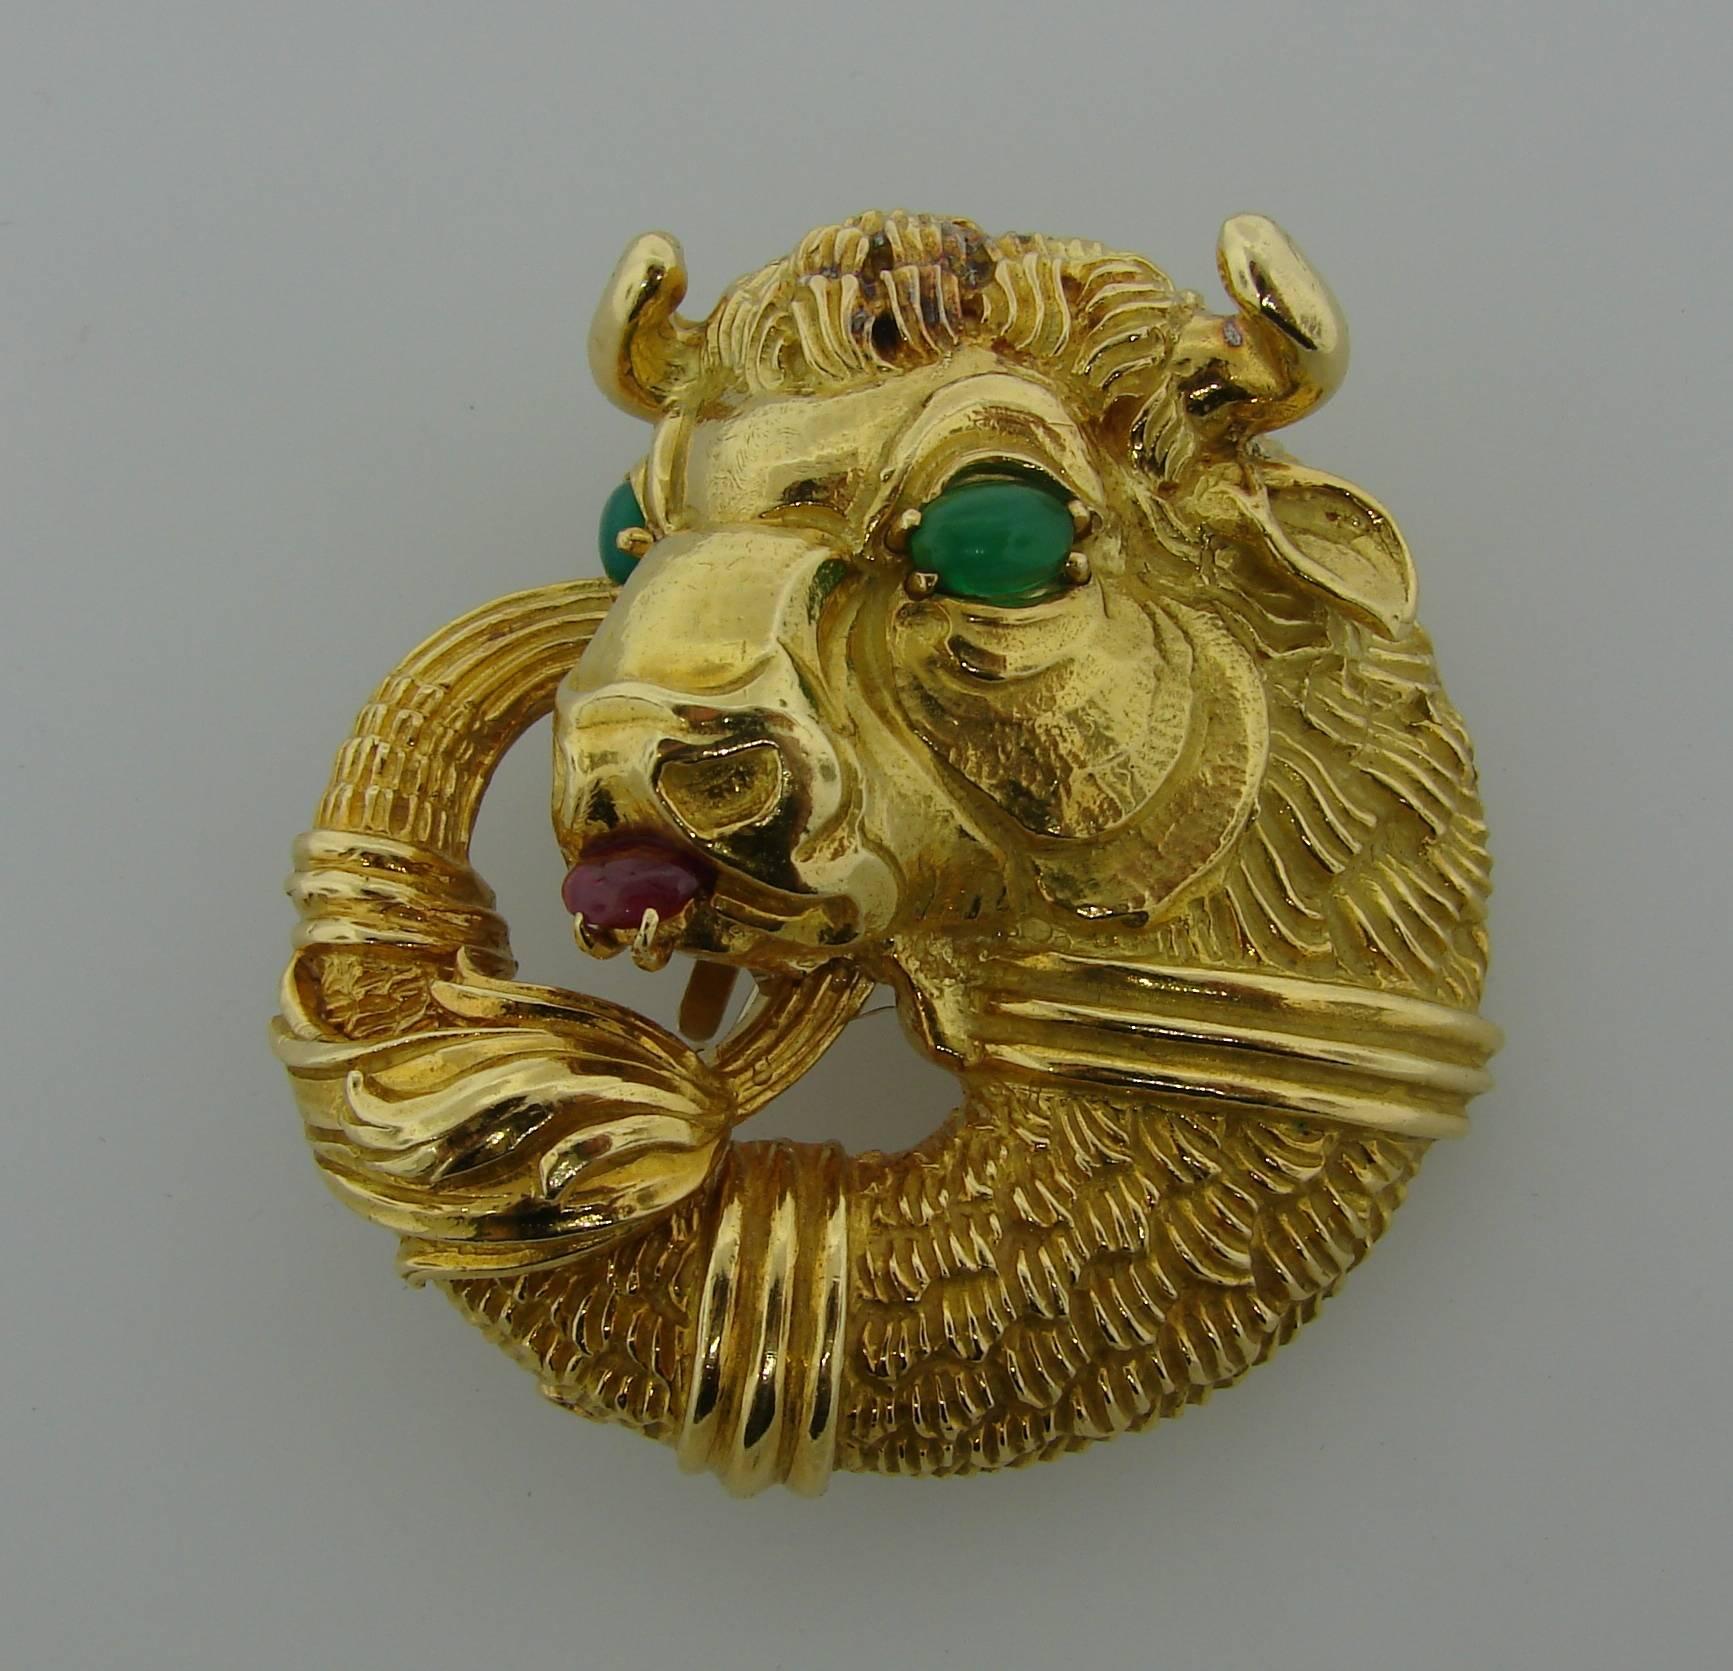 Bold and colorful pin/pendant created by David Webb in the 1970's. David Webb got a lot of inspiration in the Animals World and this bison pin is a great example of it. 
Made of 18 karat (stamped) yellow gold, the bison's eyes are accented with two